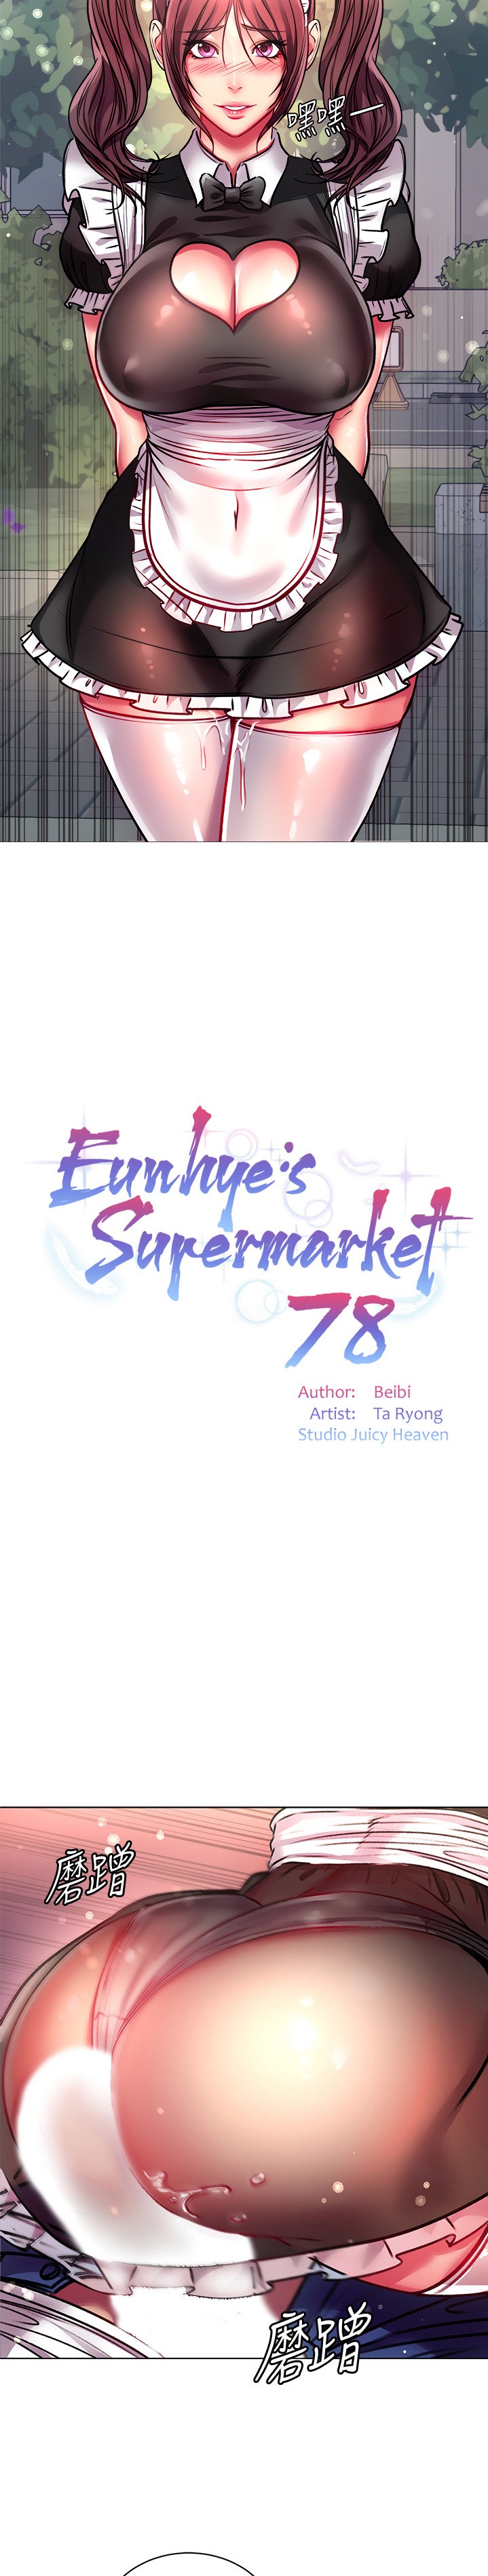 Eunhye’s Supermarket - Chapter 78 Page 6